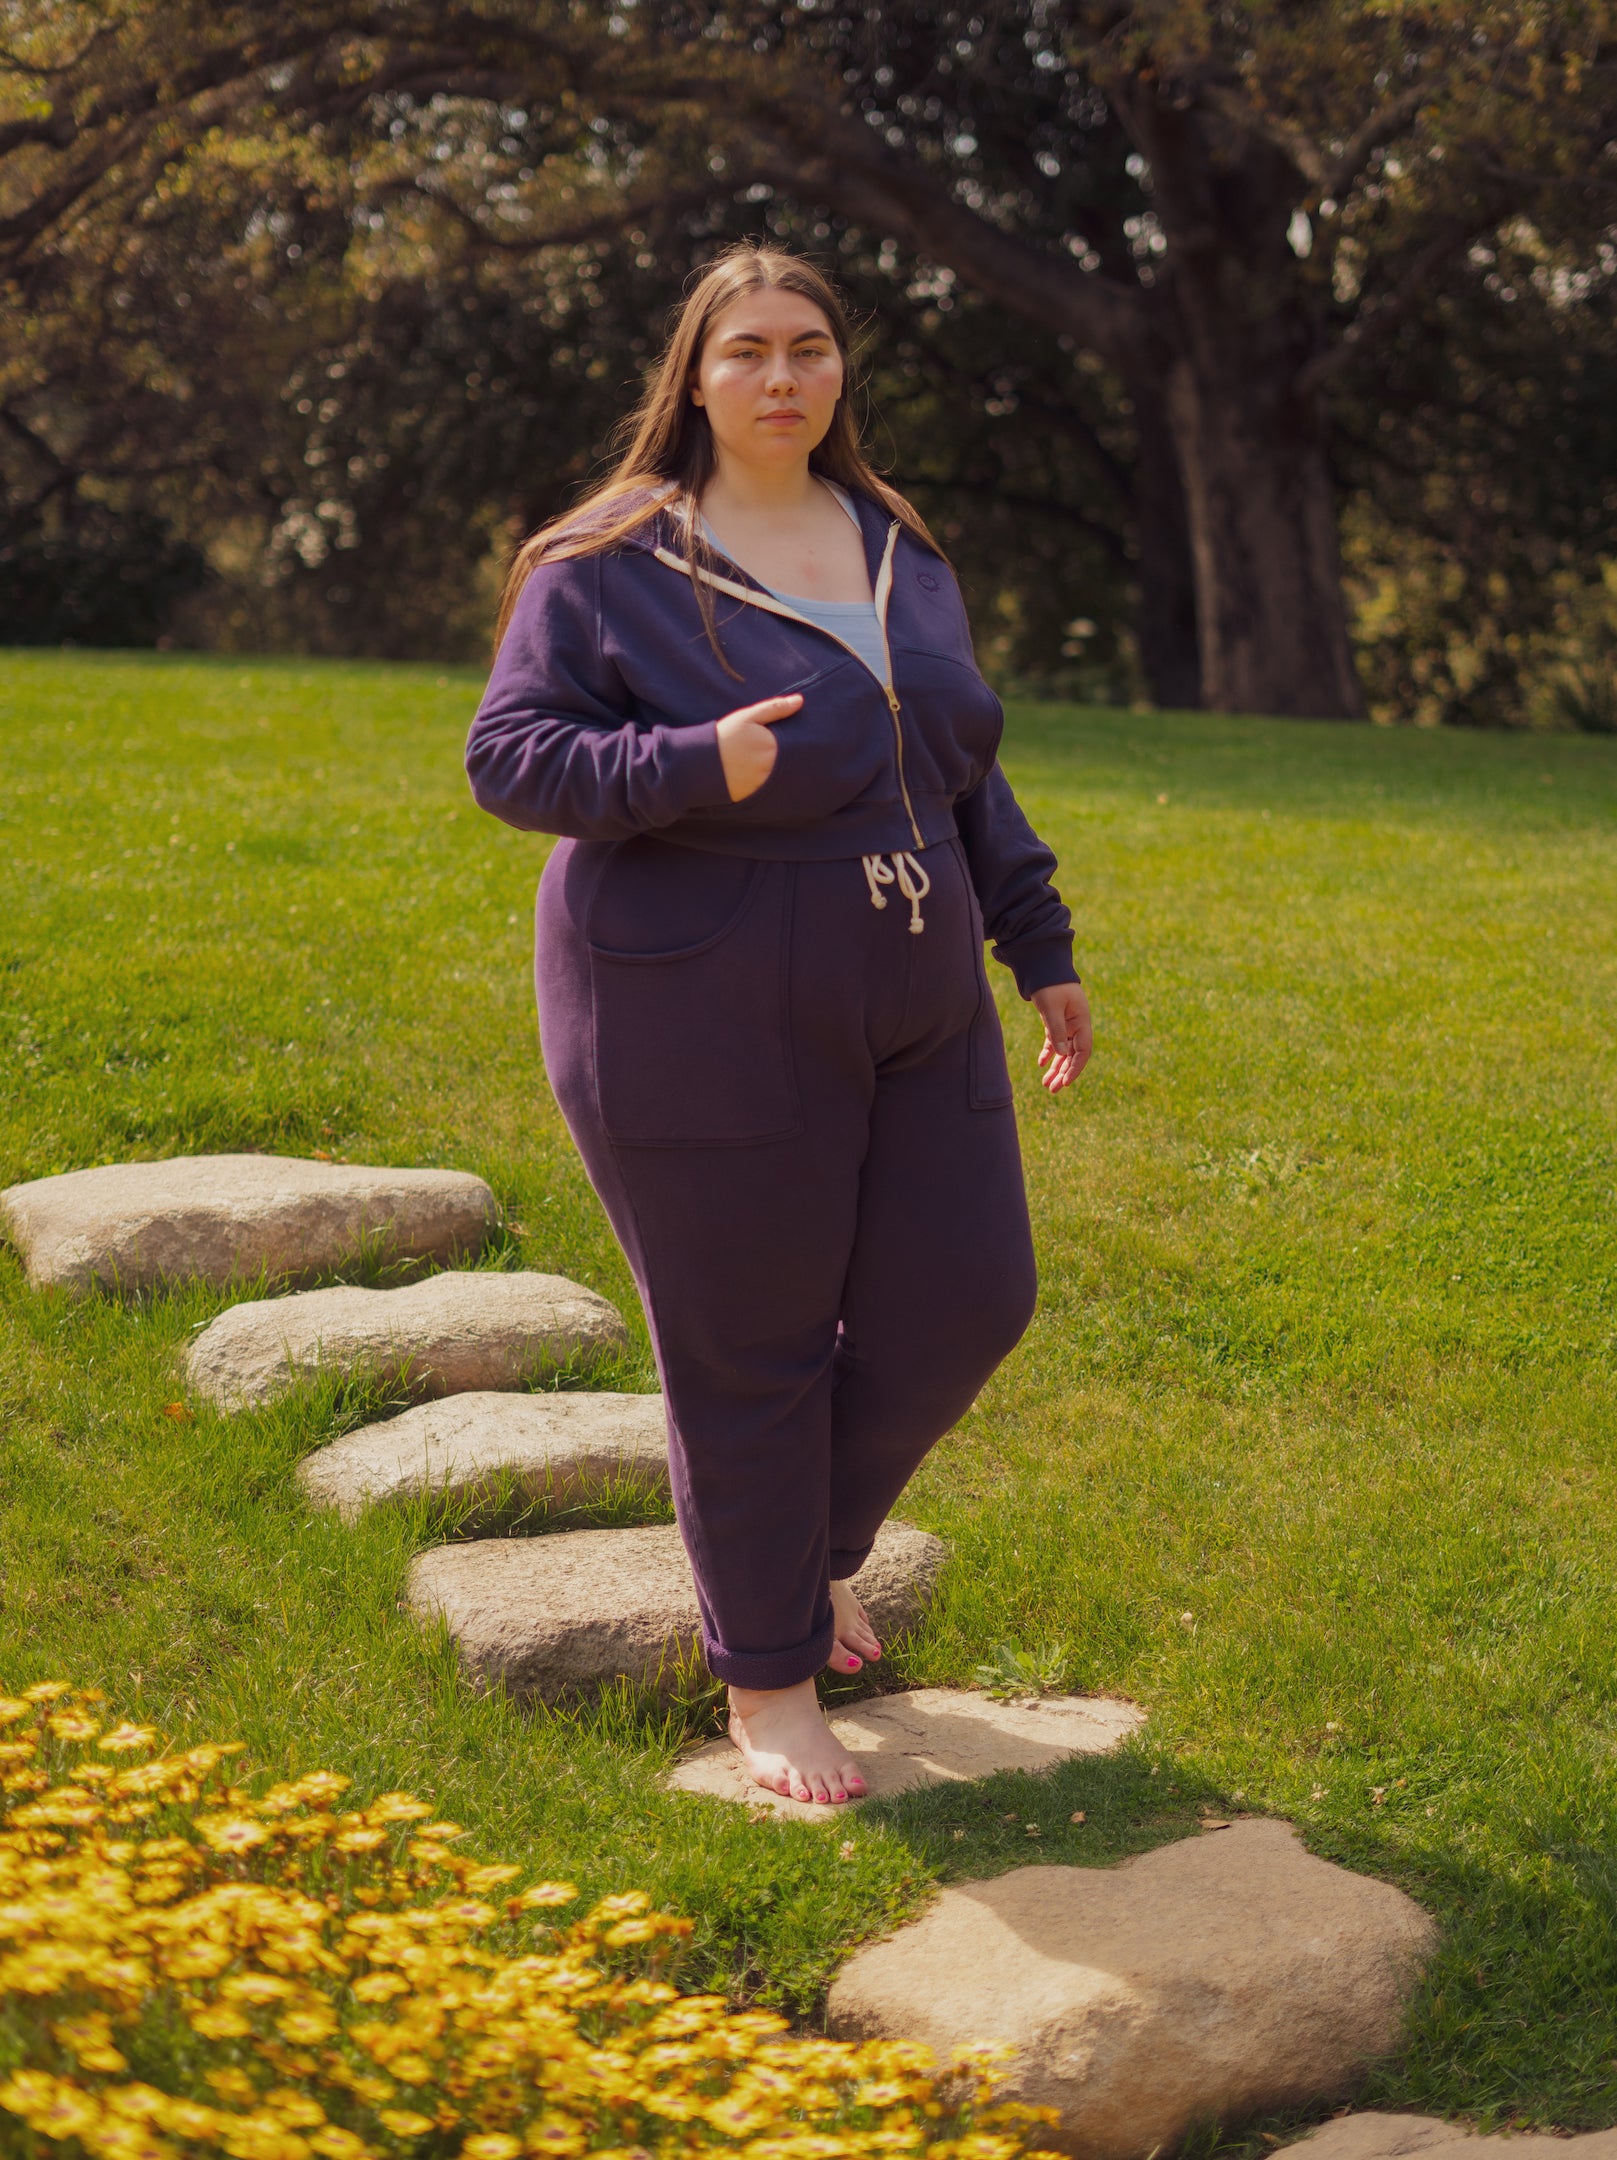 Marielena is wearing Cropped Zip Hoodie in Nebula Purple and matching Rolled Cuff Sweat Pants